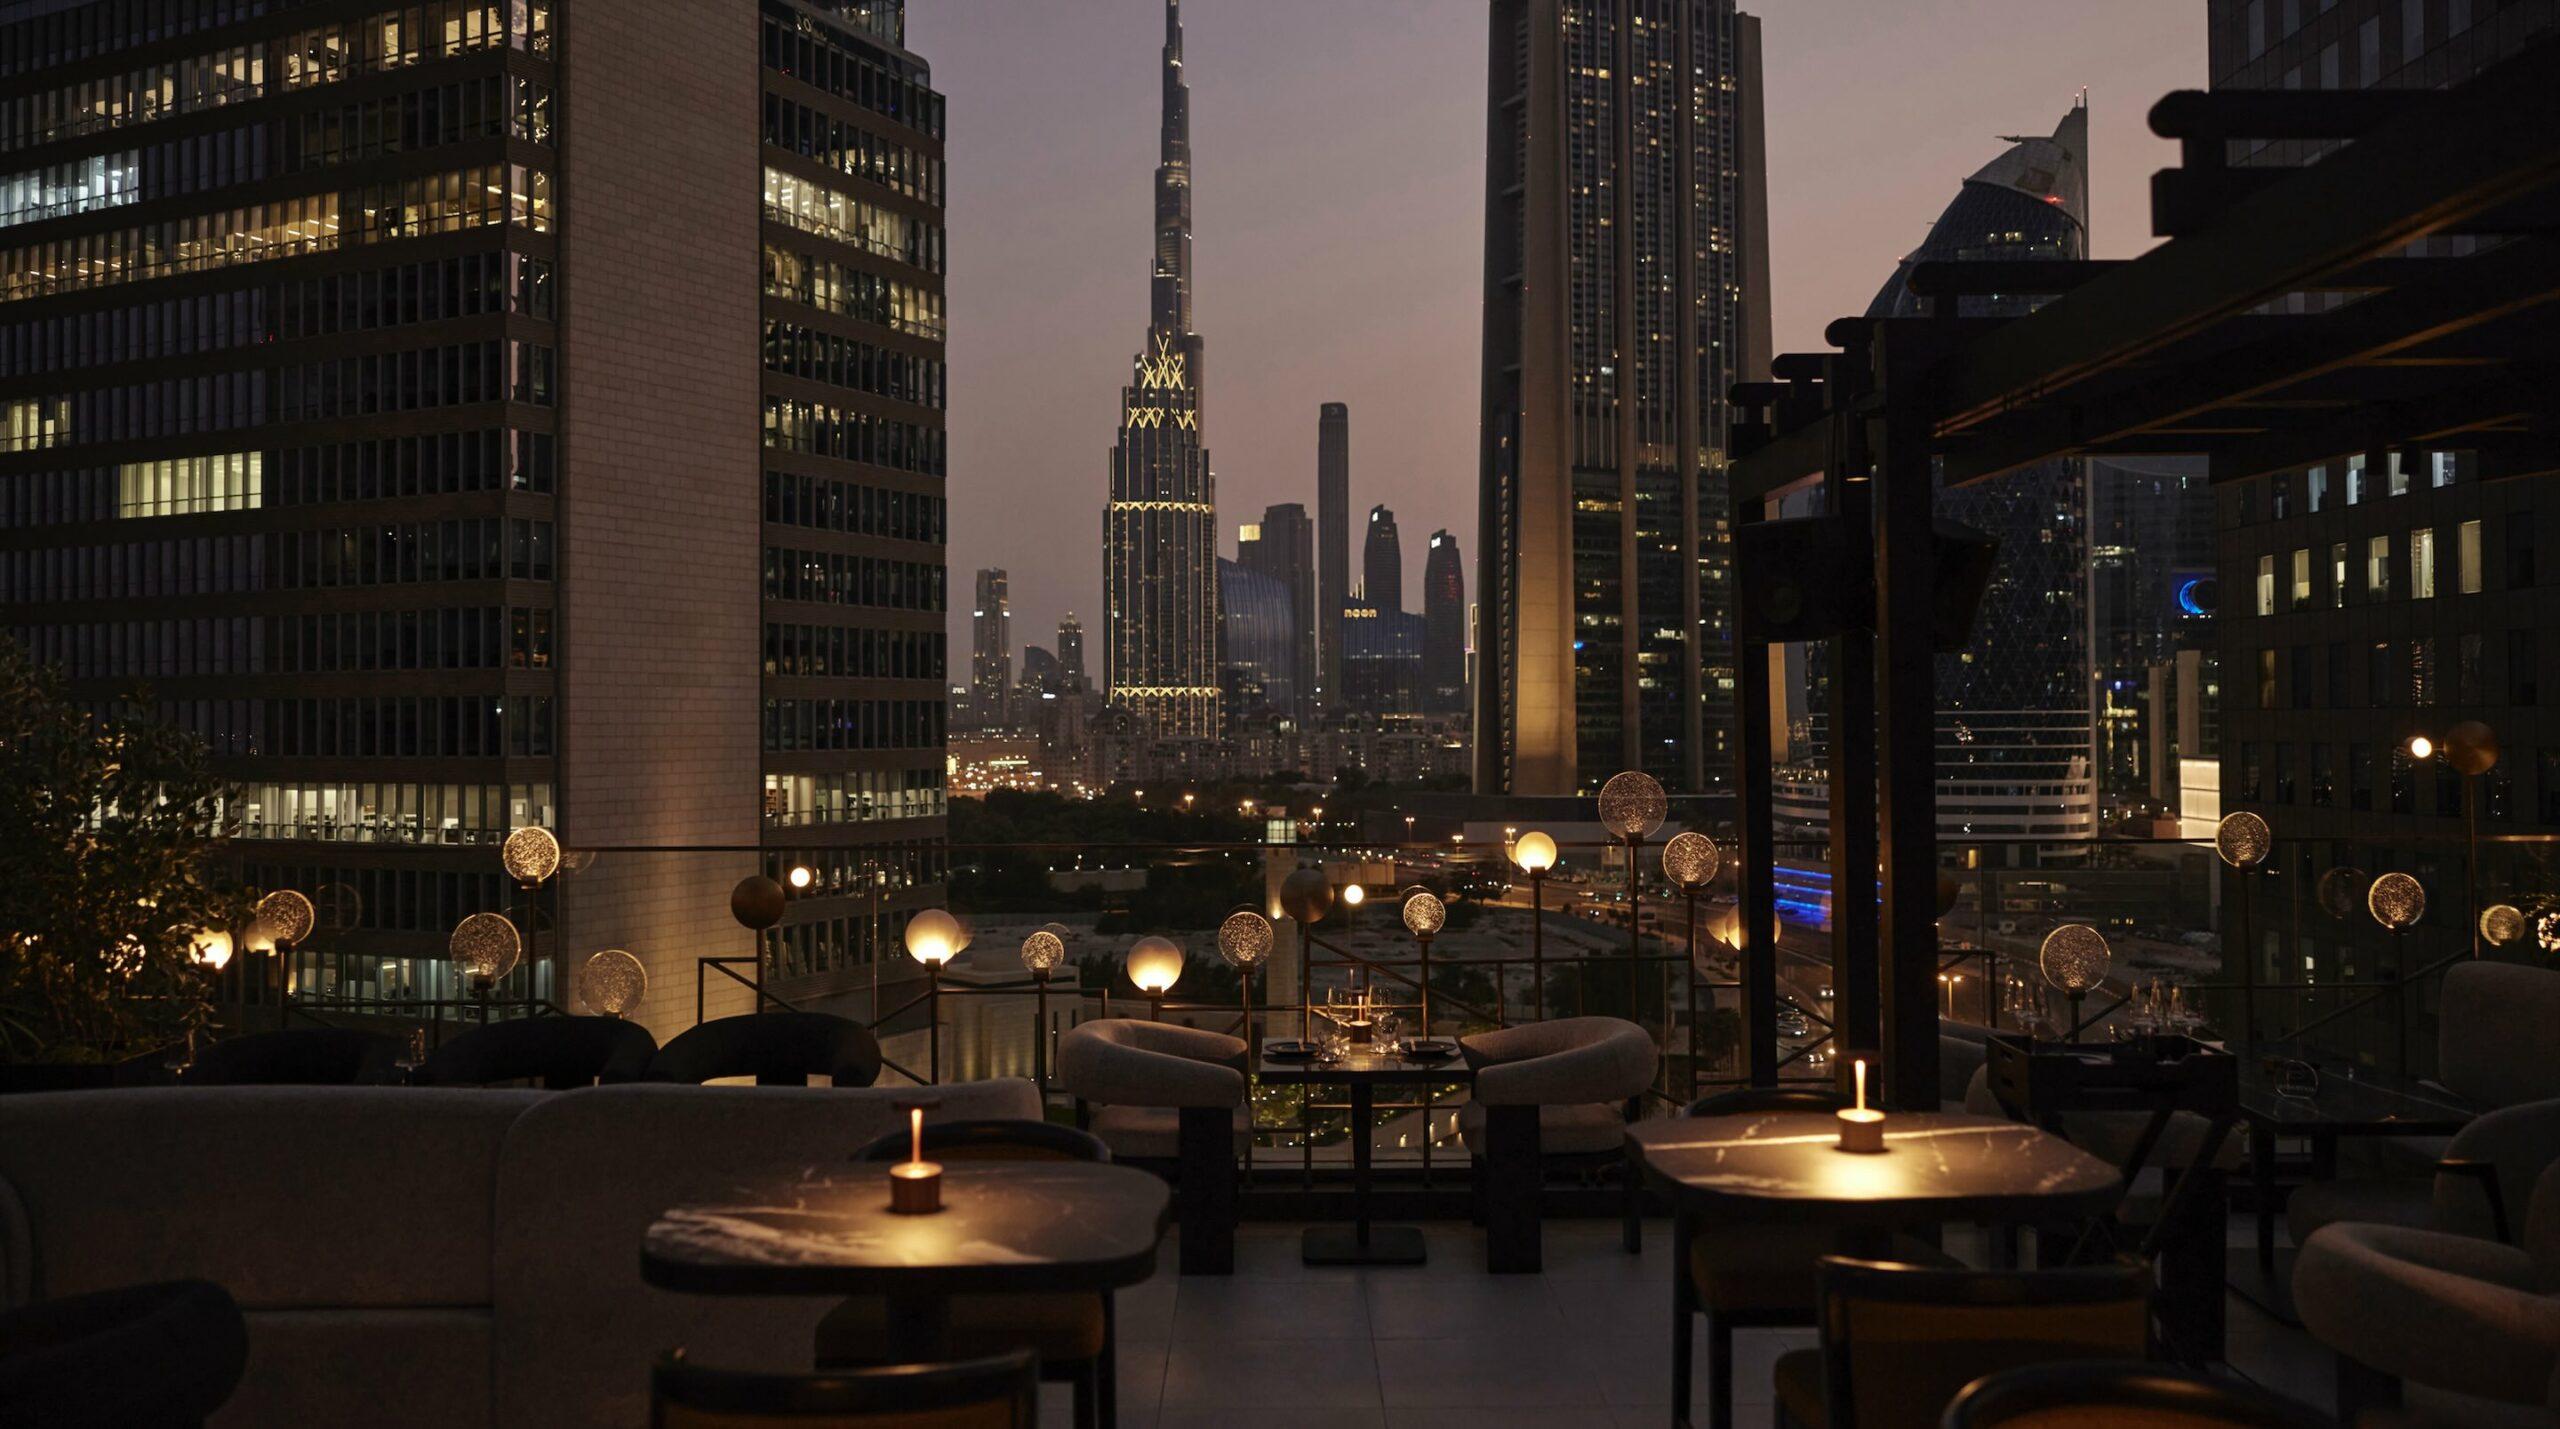 Sunset Delights: 4 romantic experiences at Four Seasons Hotels Dubai this February